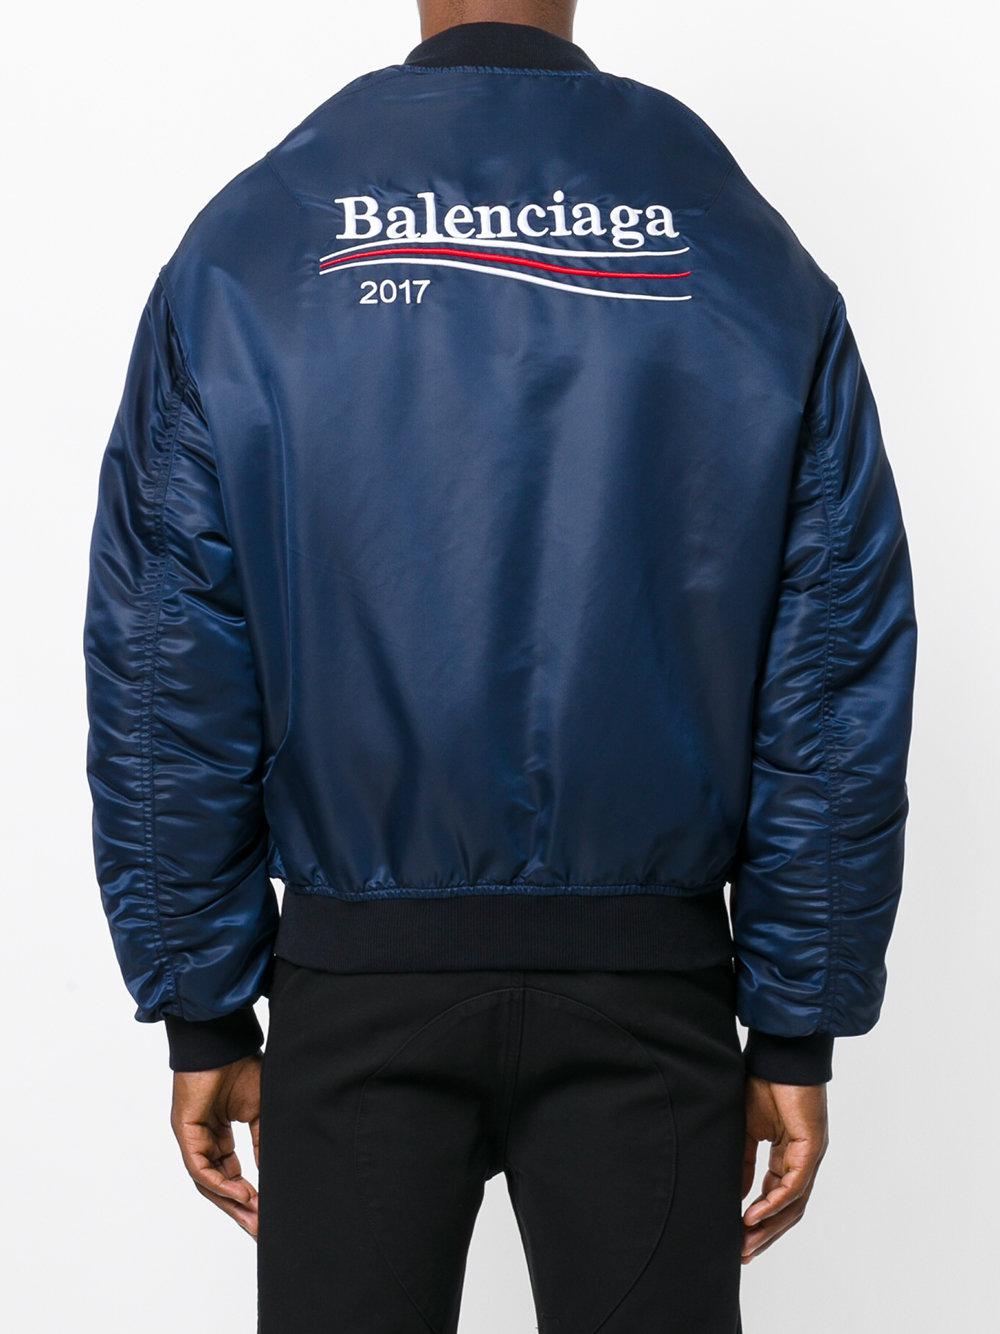 Balenciaga Synthetic 2017 Bomber Jacket in Blue for Men | Lyst